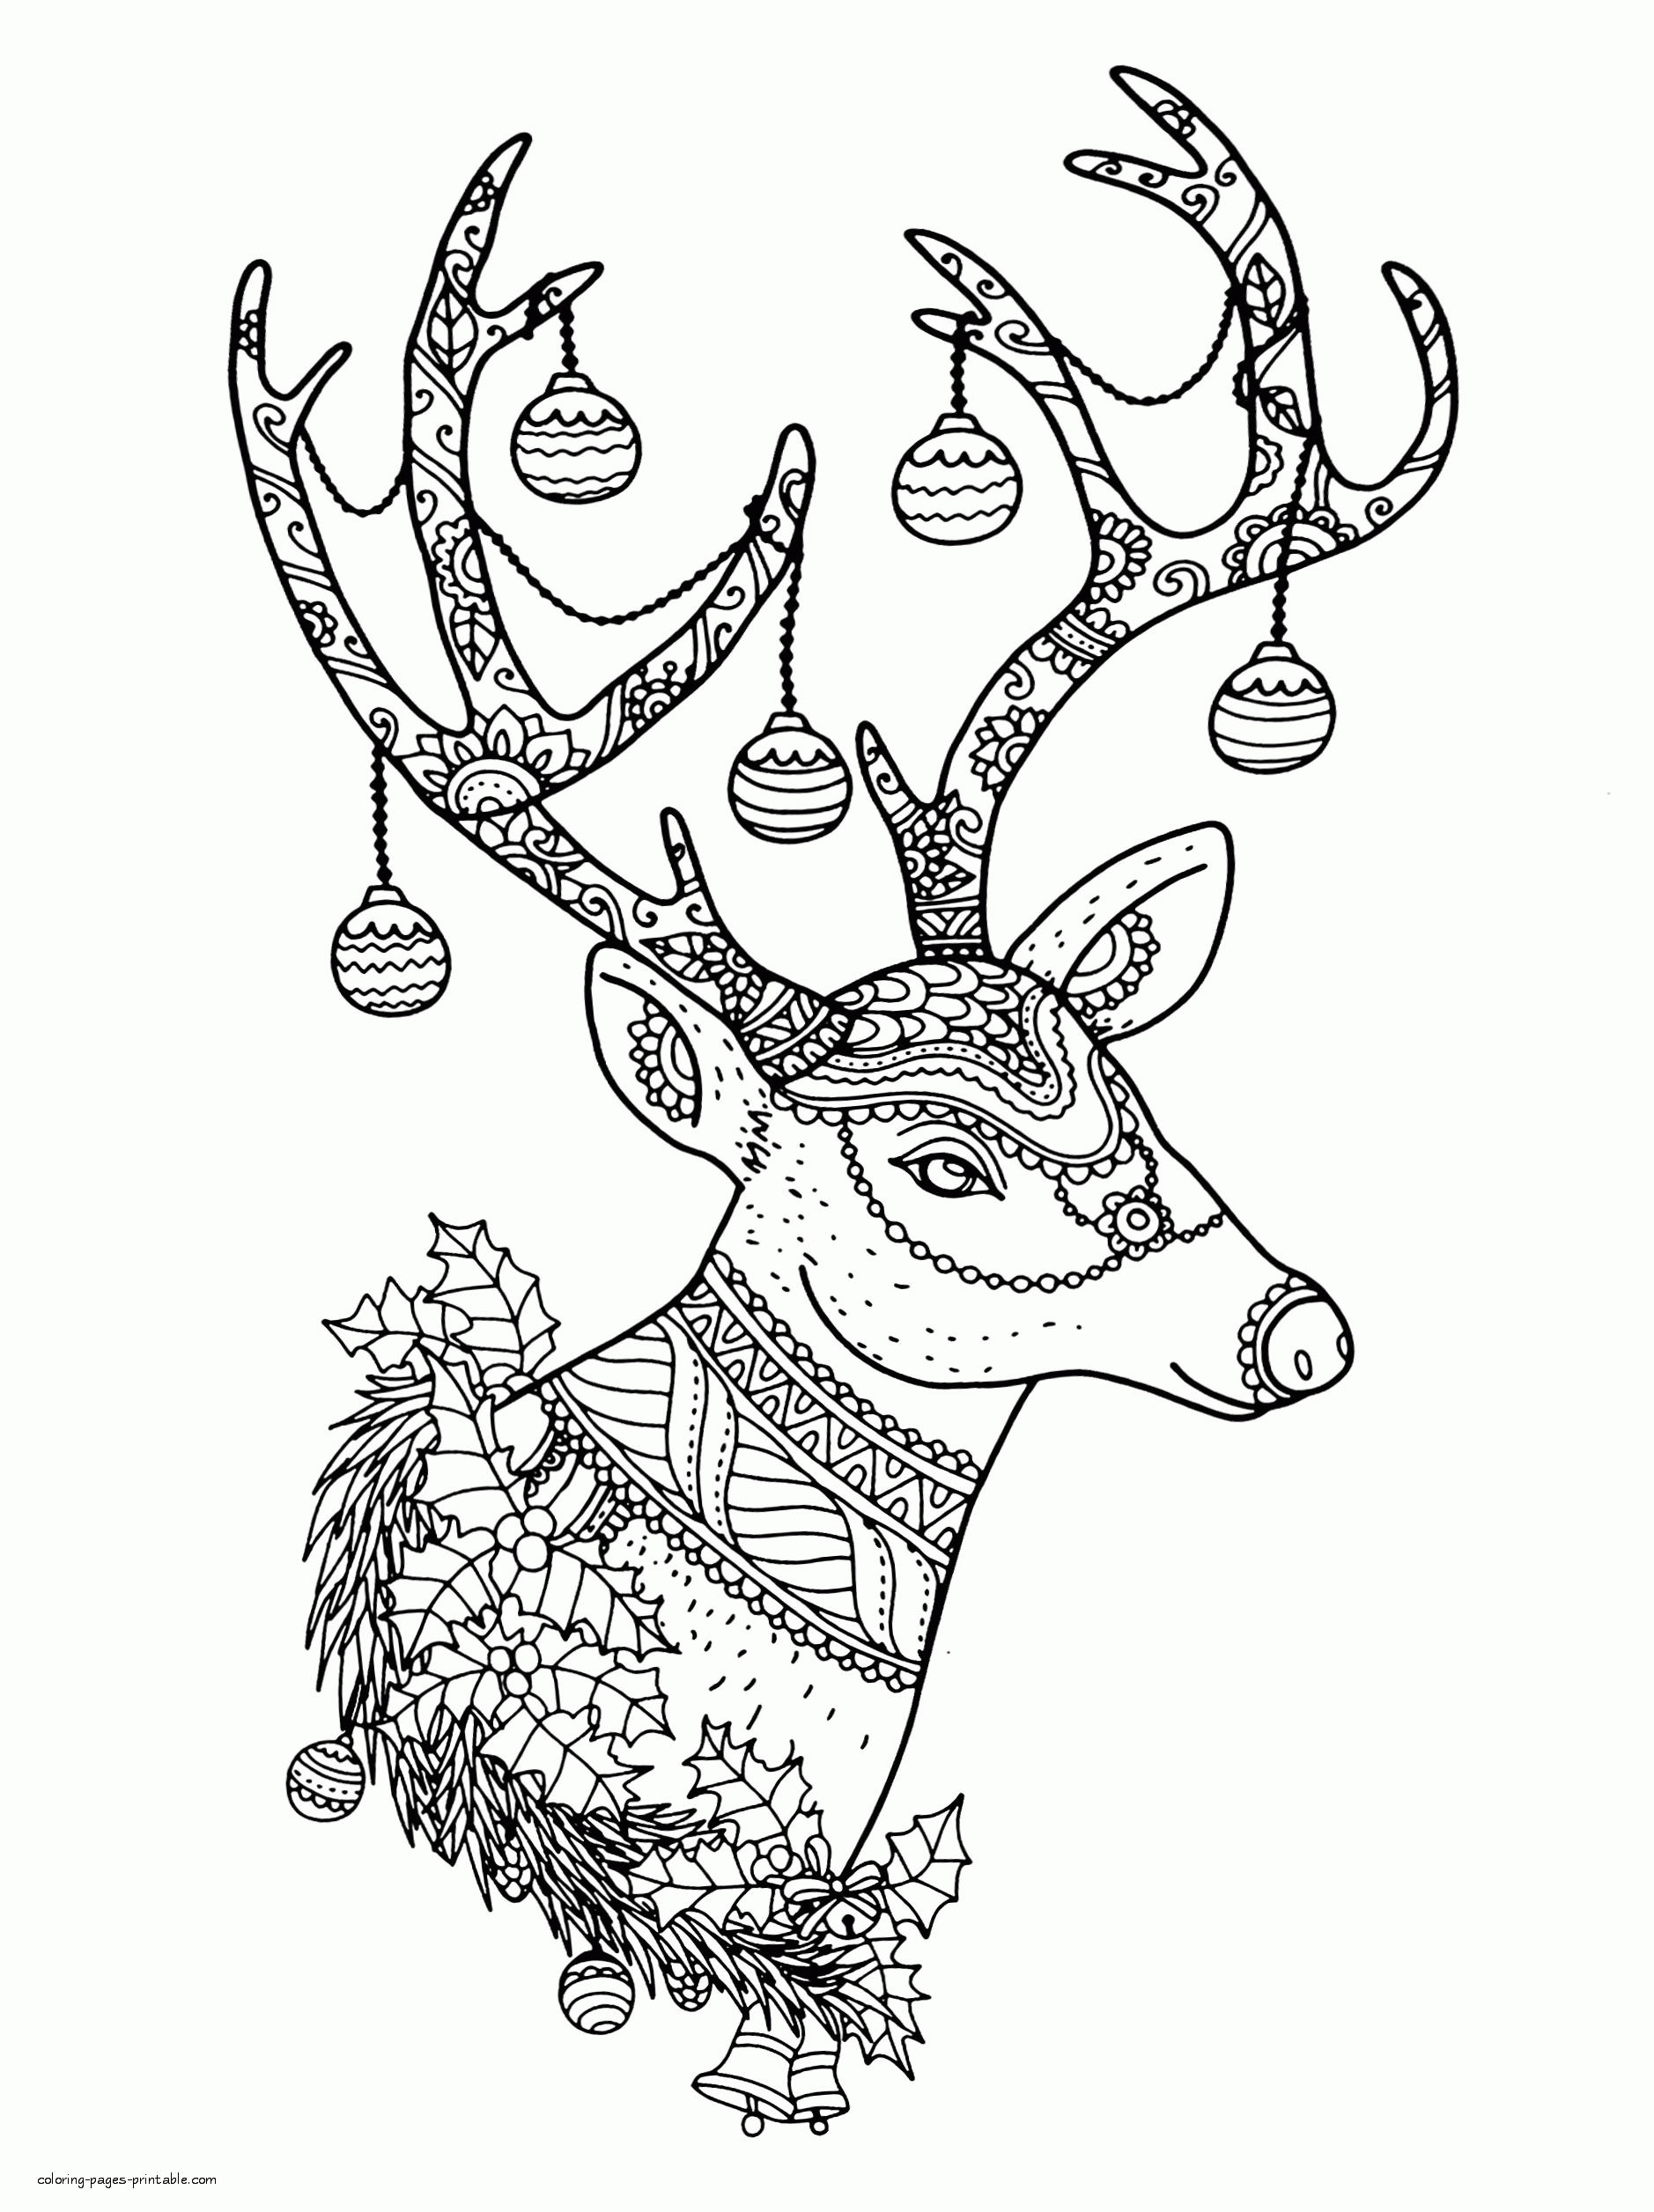 Free Christmas Reindeer Colouring Pages For Adults COLORINGPAGES